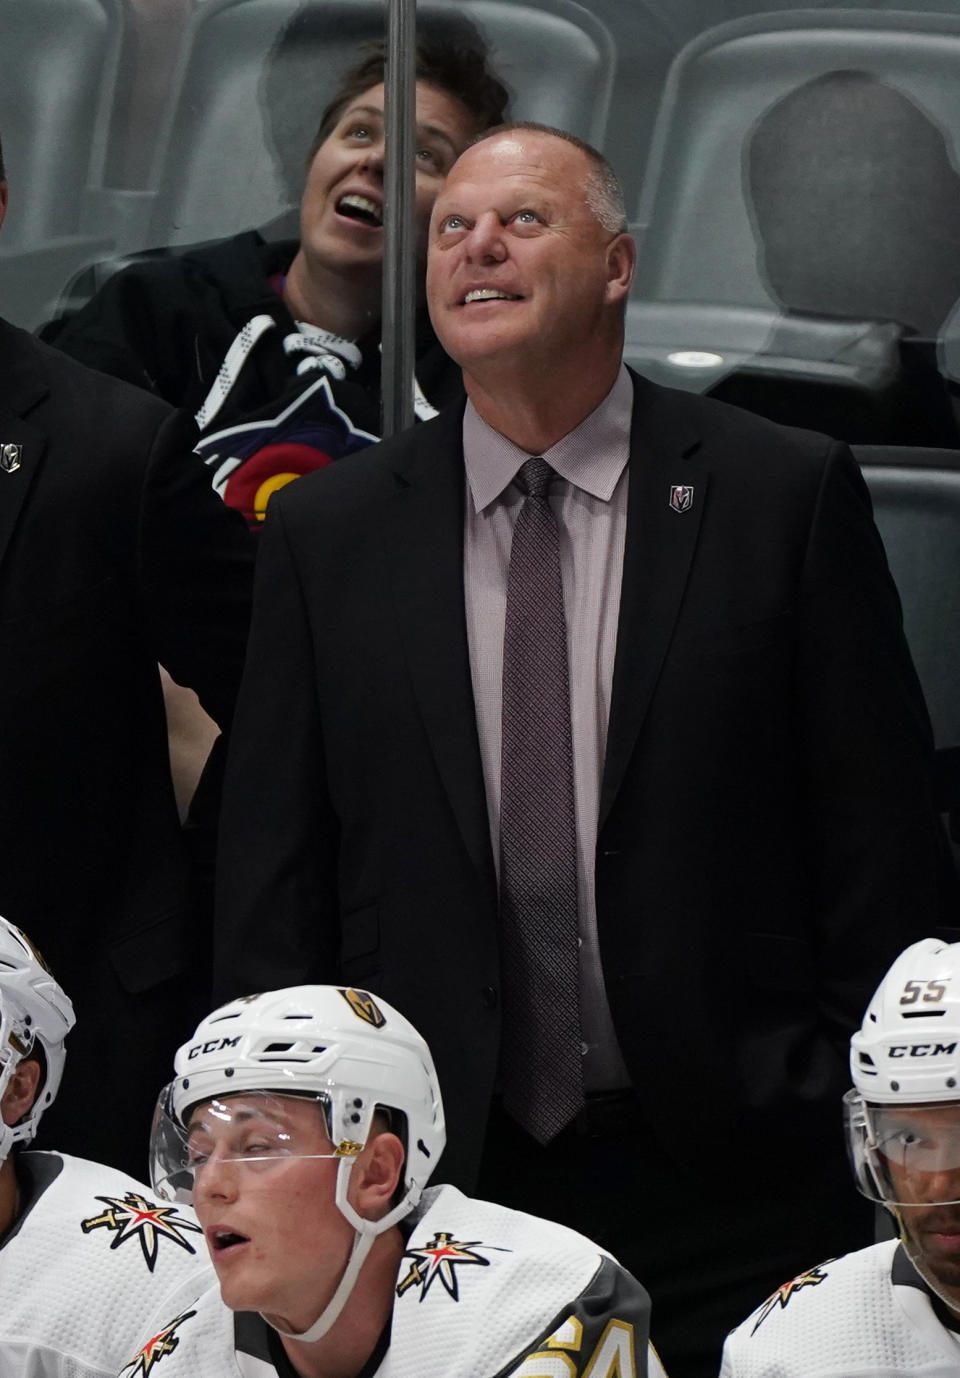 Vegas Golden Knights coach Gerard Gallant smiles during the third period of the team's preseason NHL hockey game against the Colorado Avalanche, Tuesday, Sept. 17, 2019, in Denver. (AP Photo/Jack Dempsey)